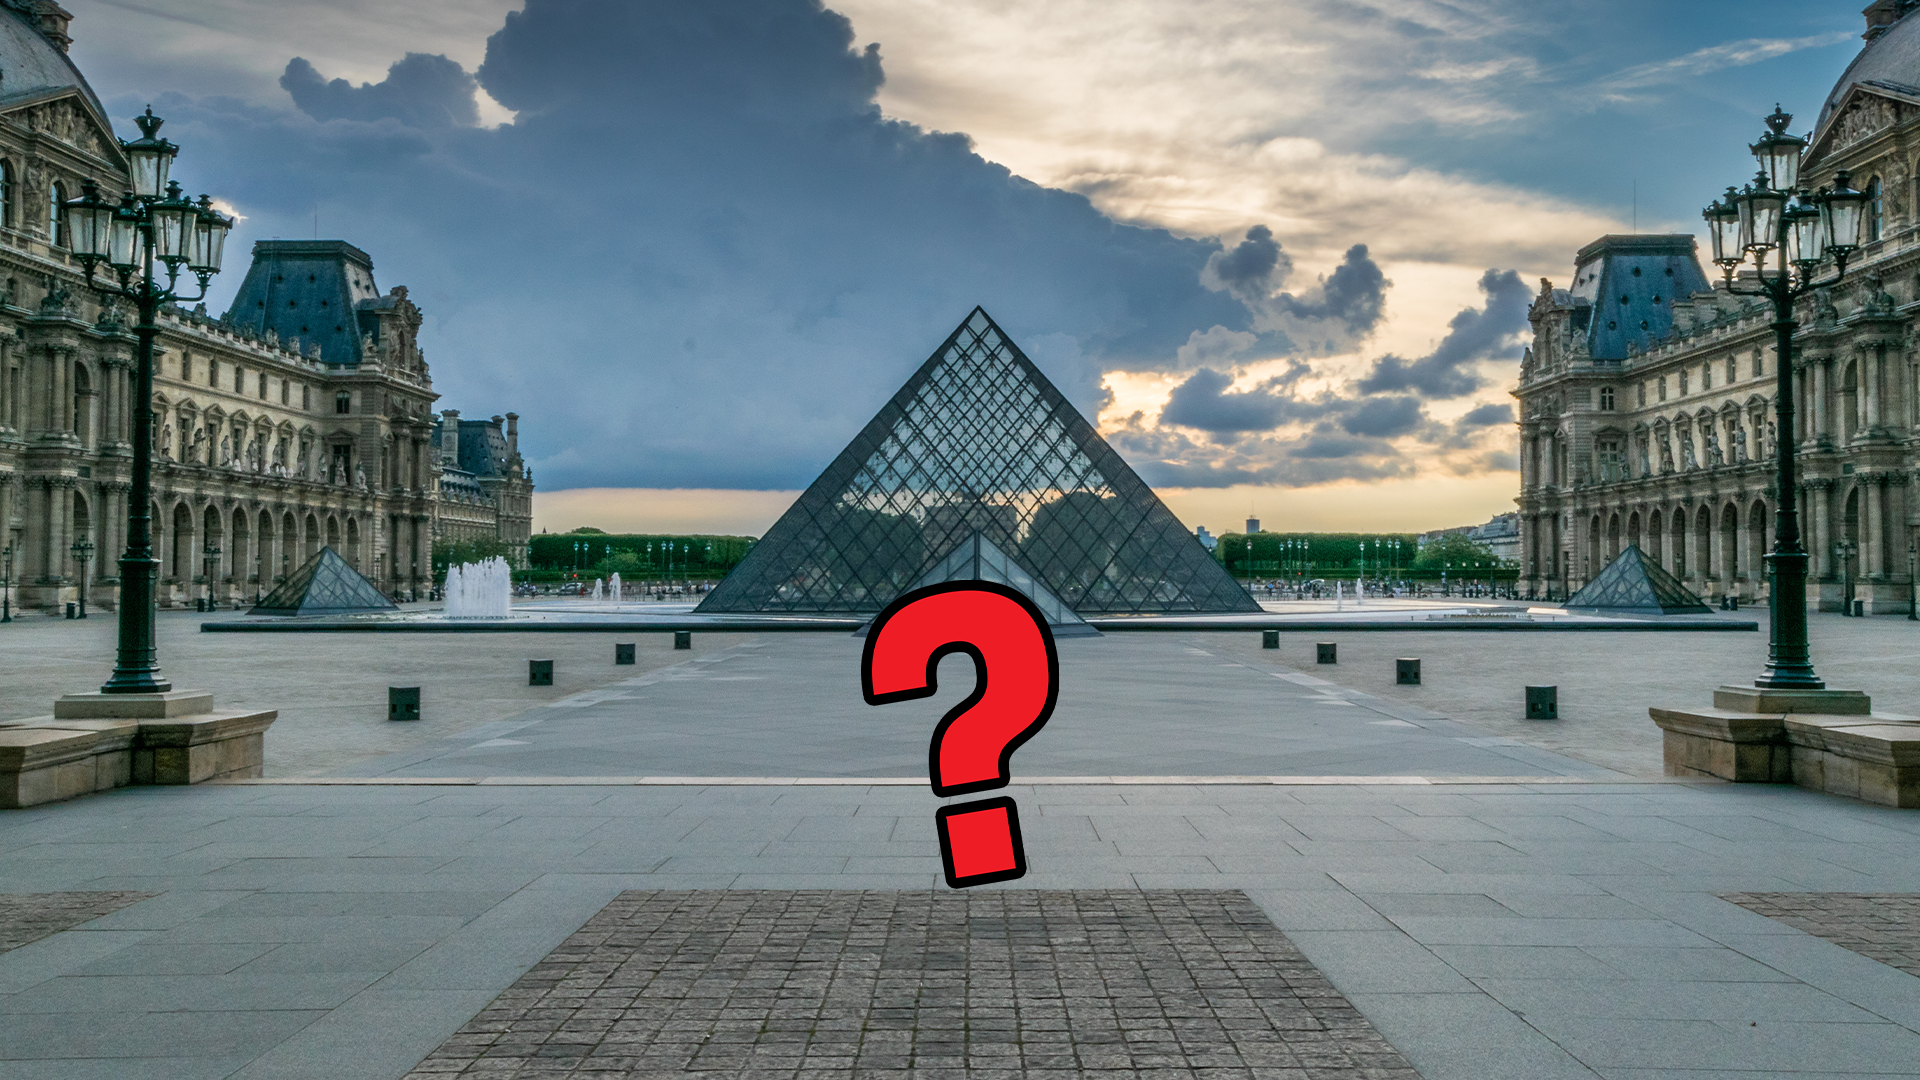 Art gallery in Paris and question mark 